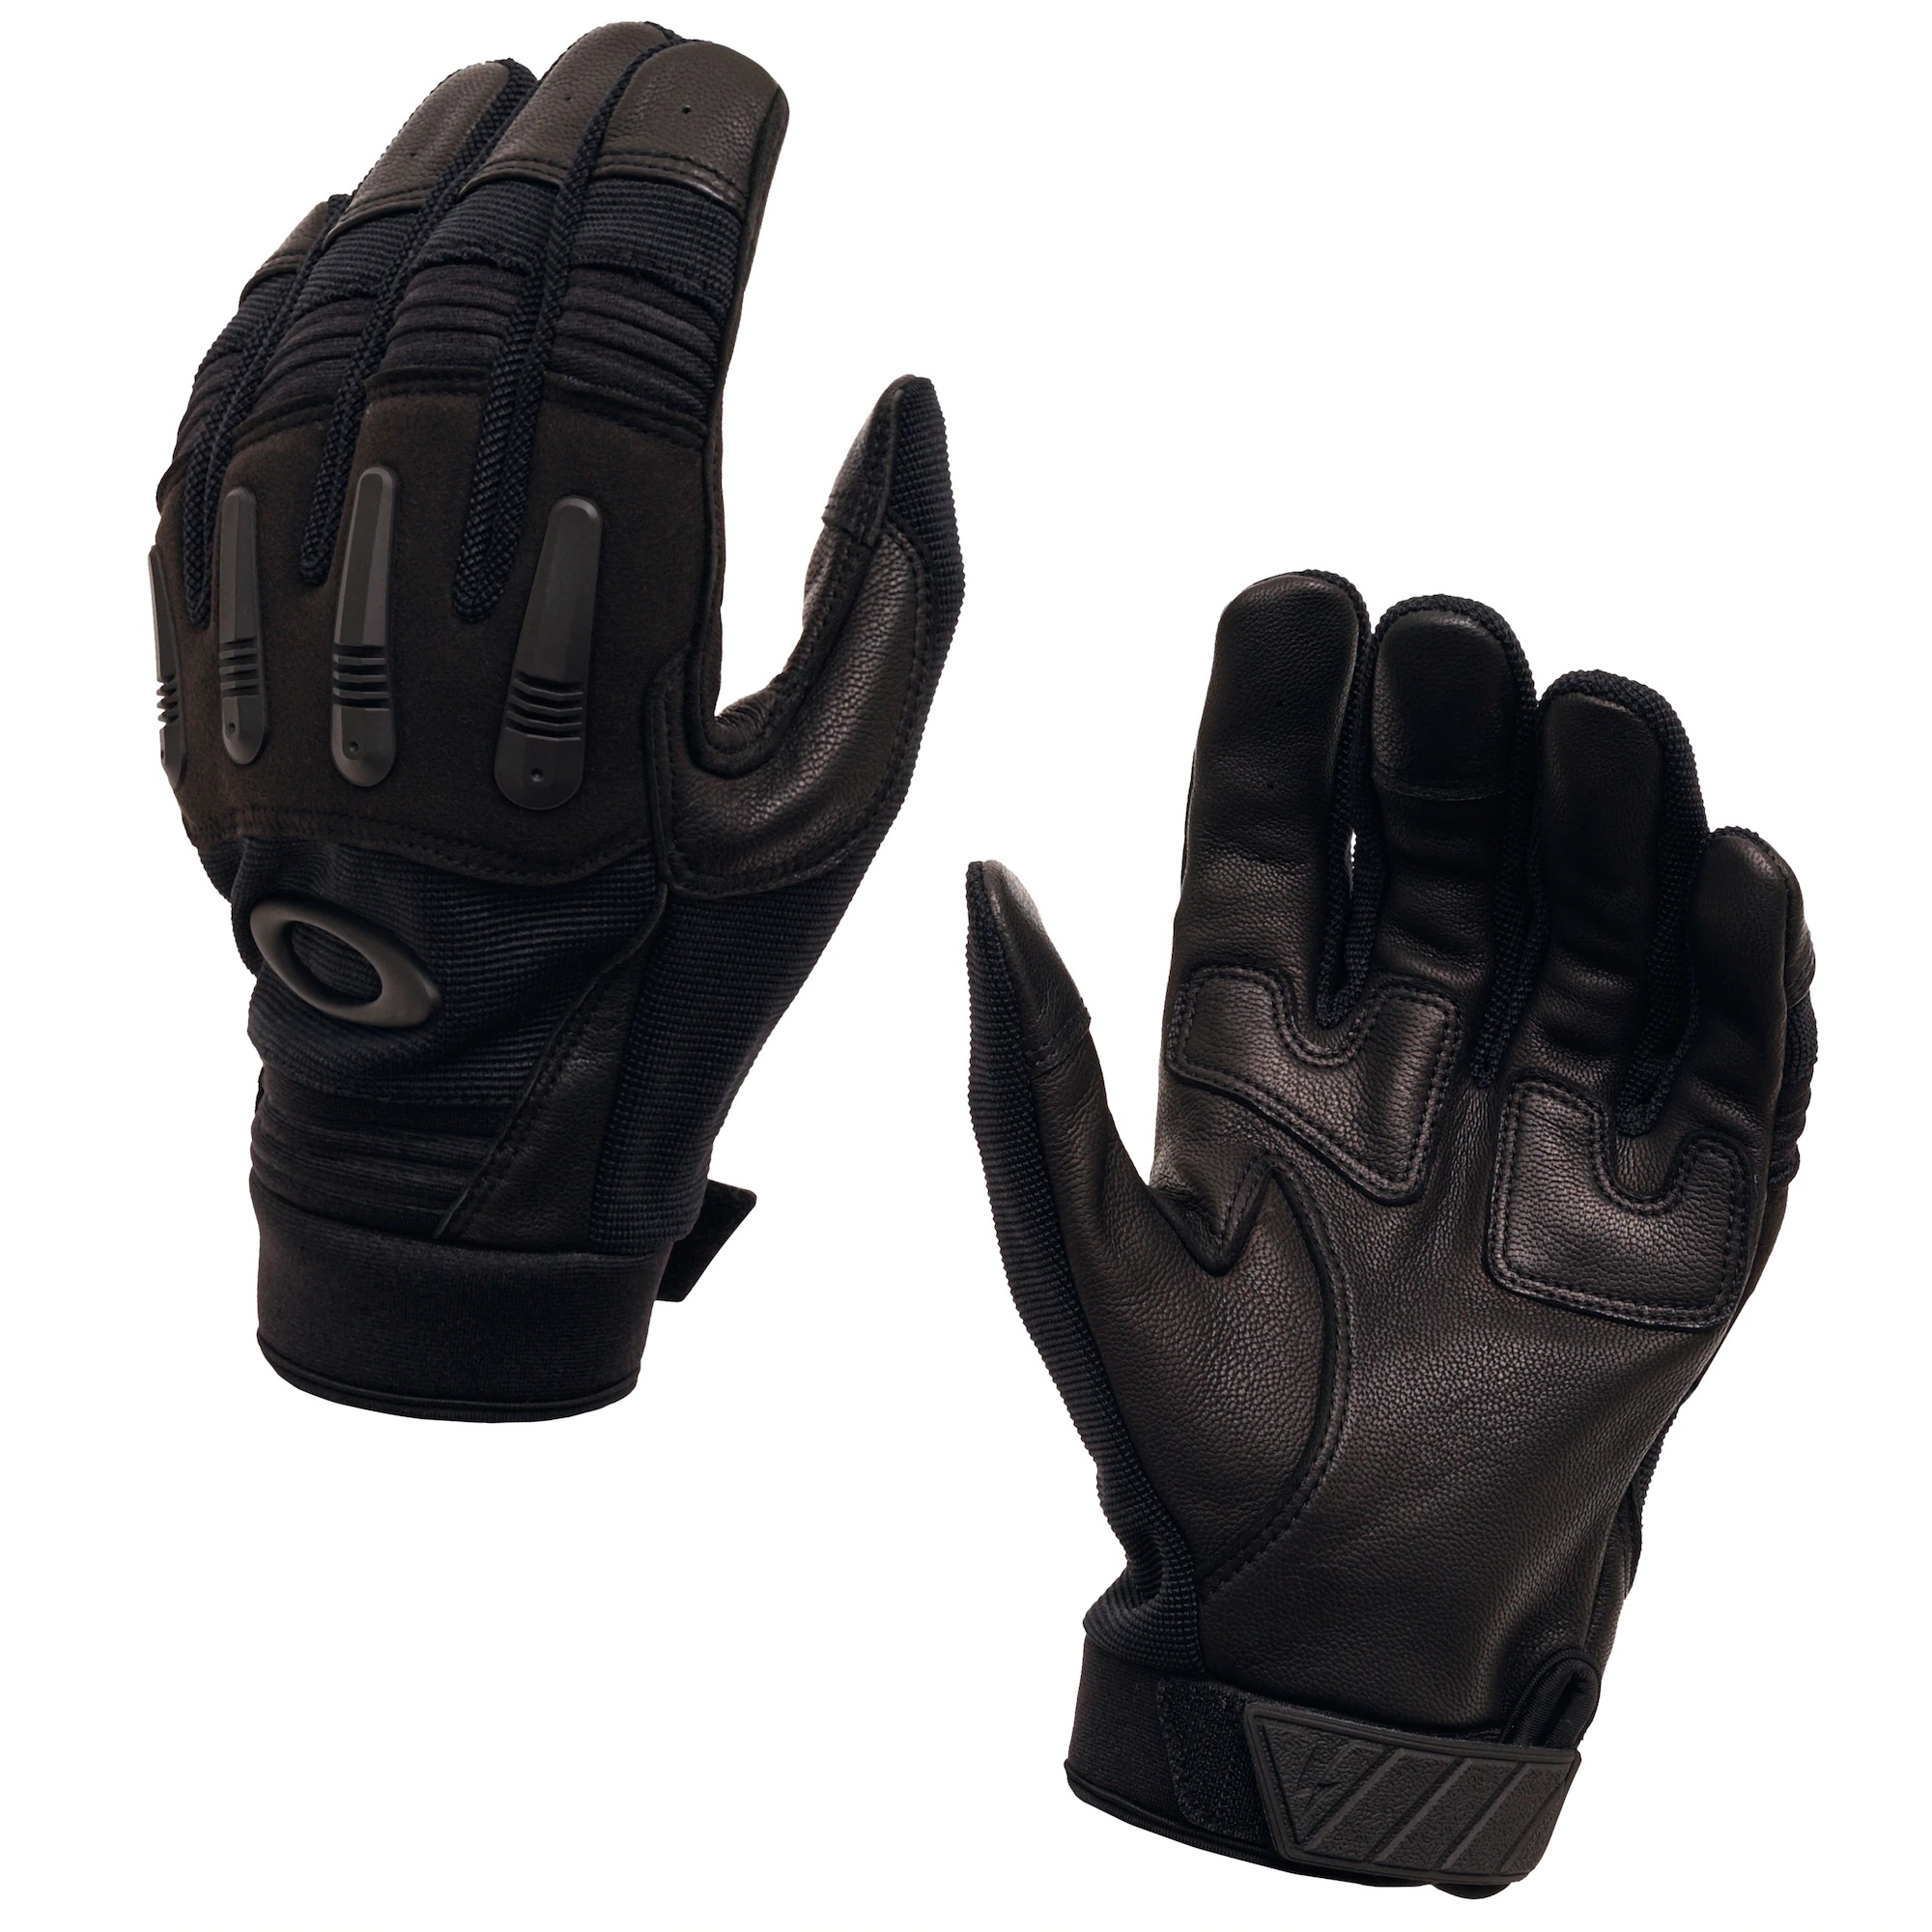 Transition Tactical Gloves